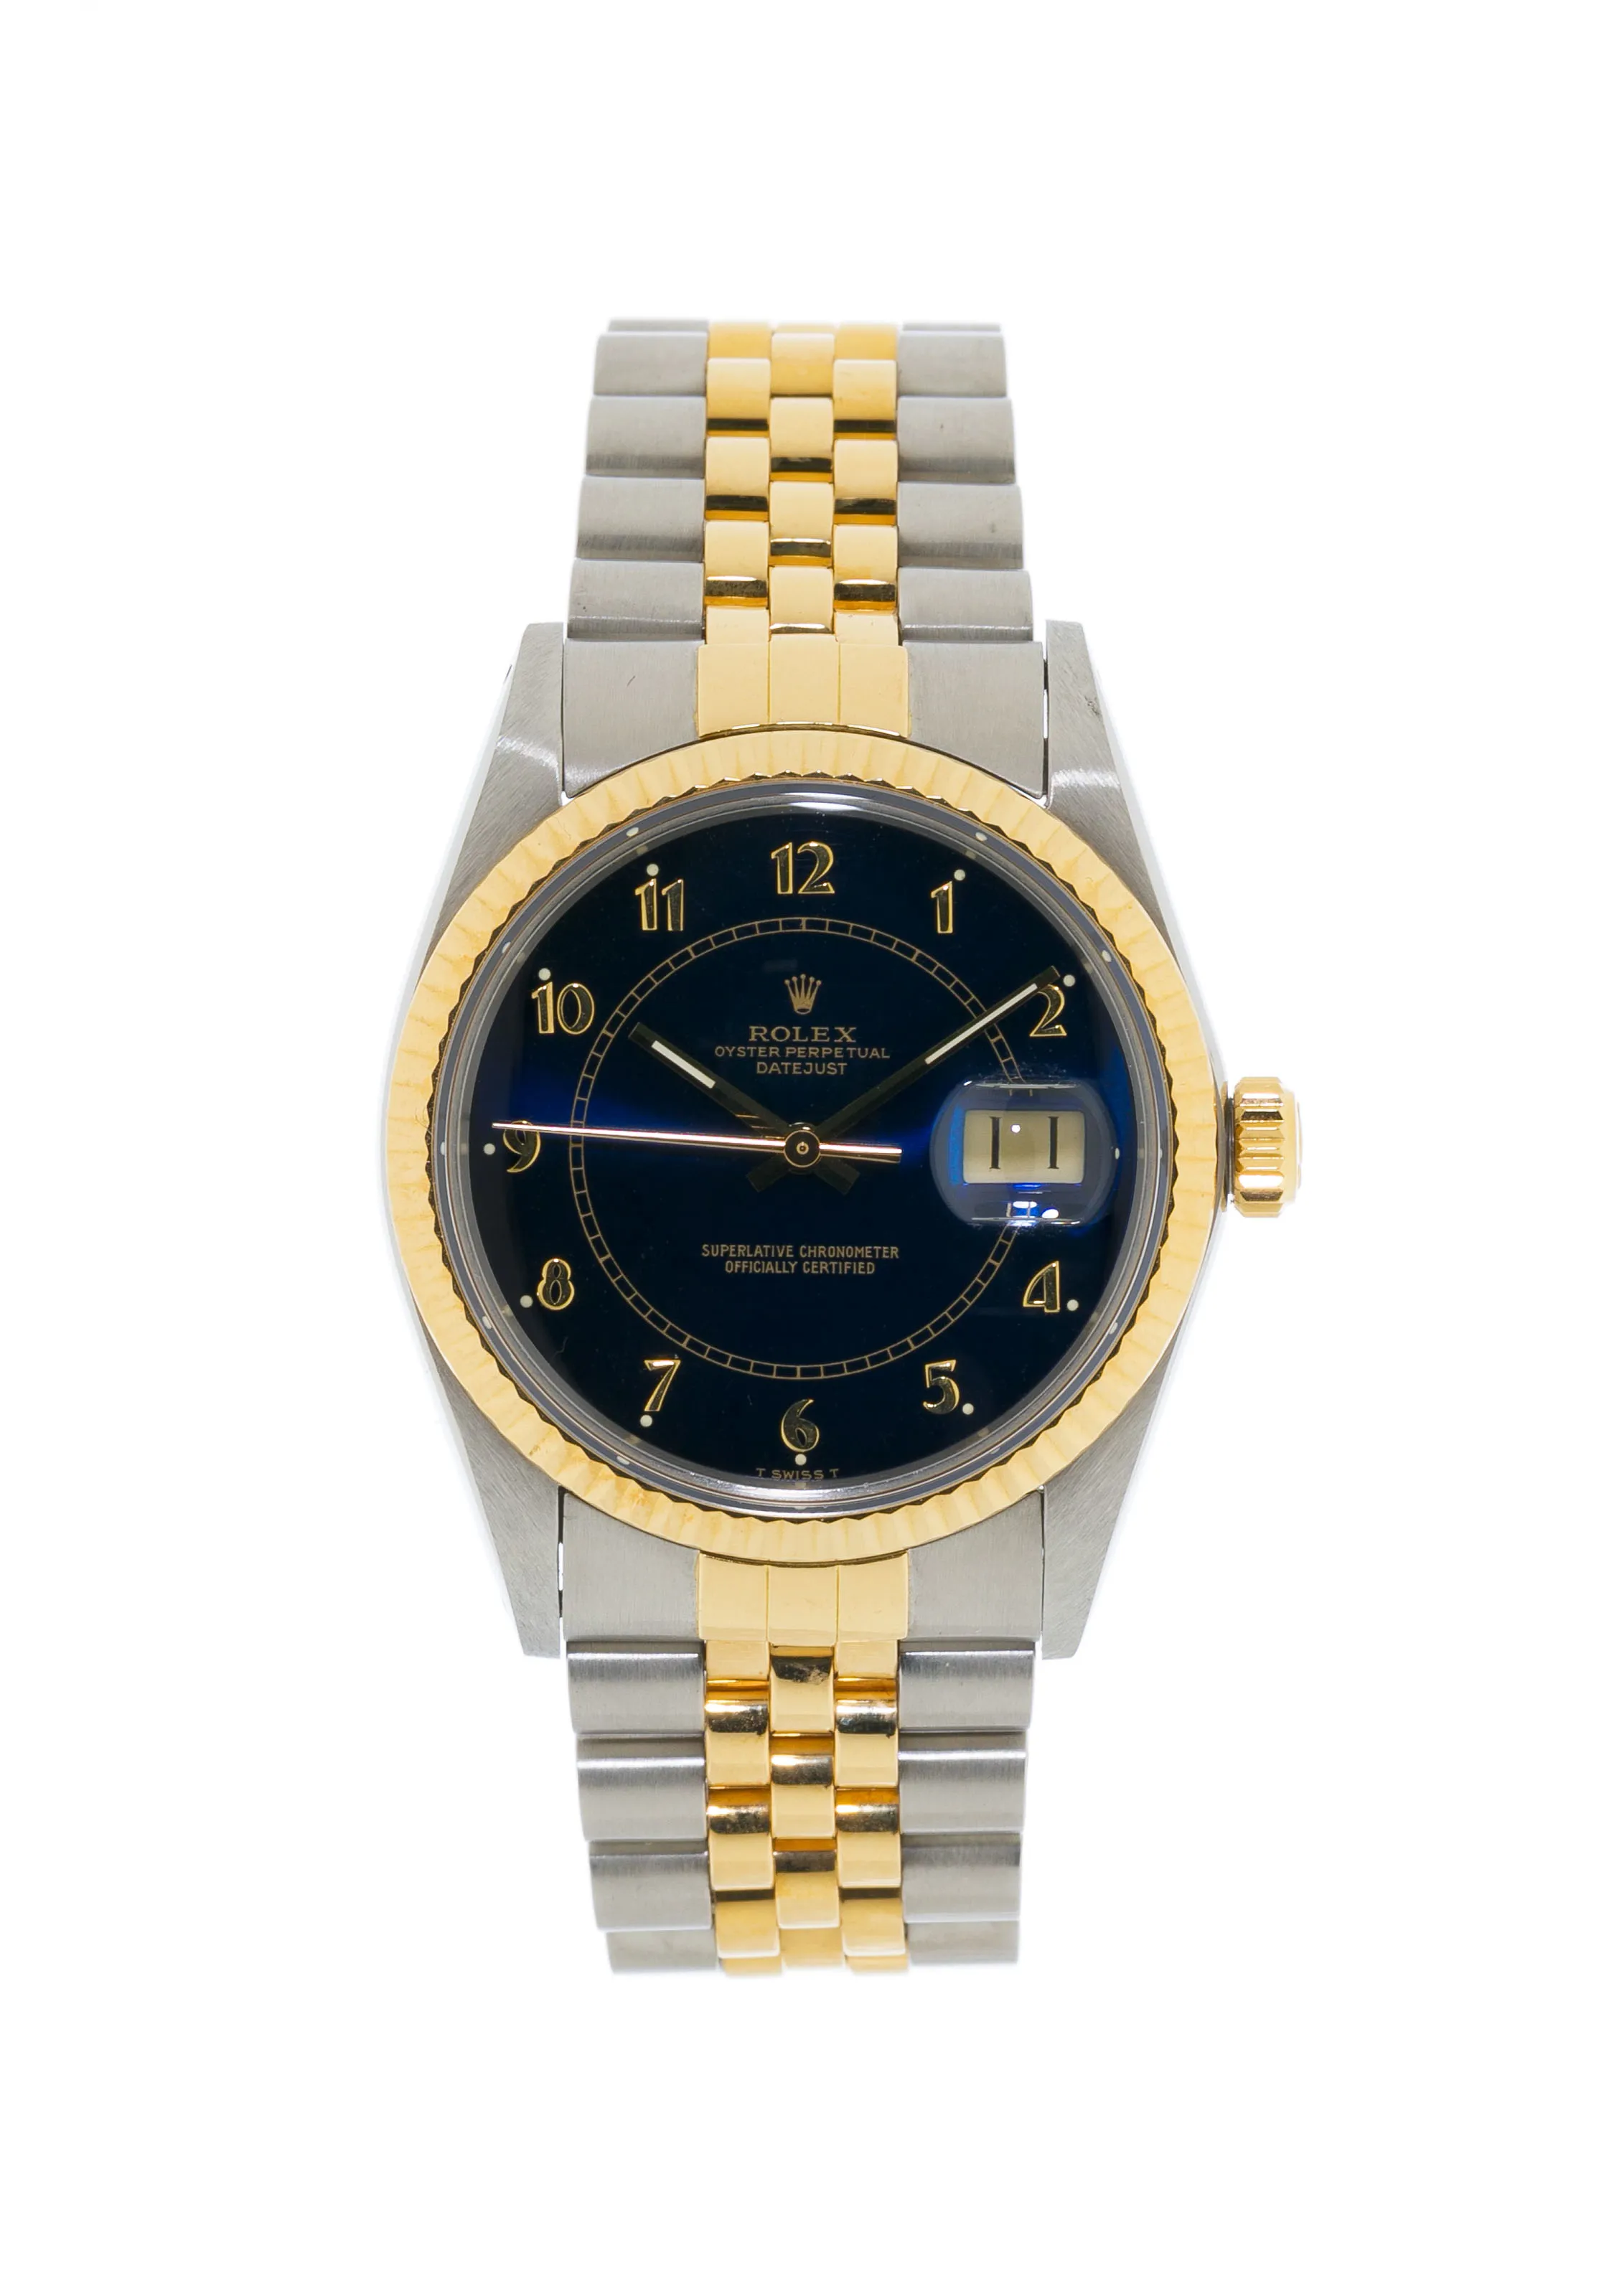 Rolex Datejust 16013 / 16000 36mm Yellow gold and stainless steel Black